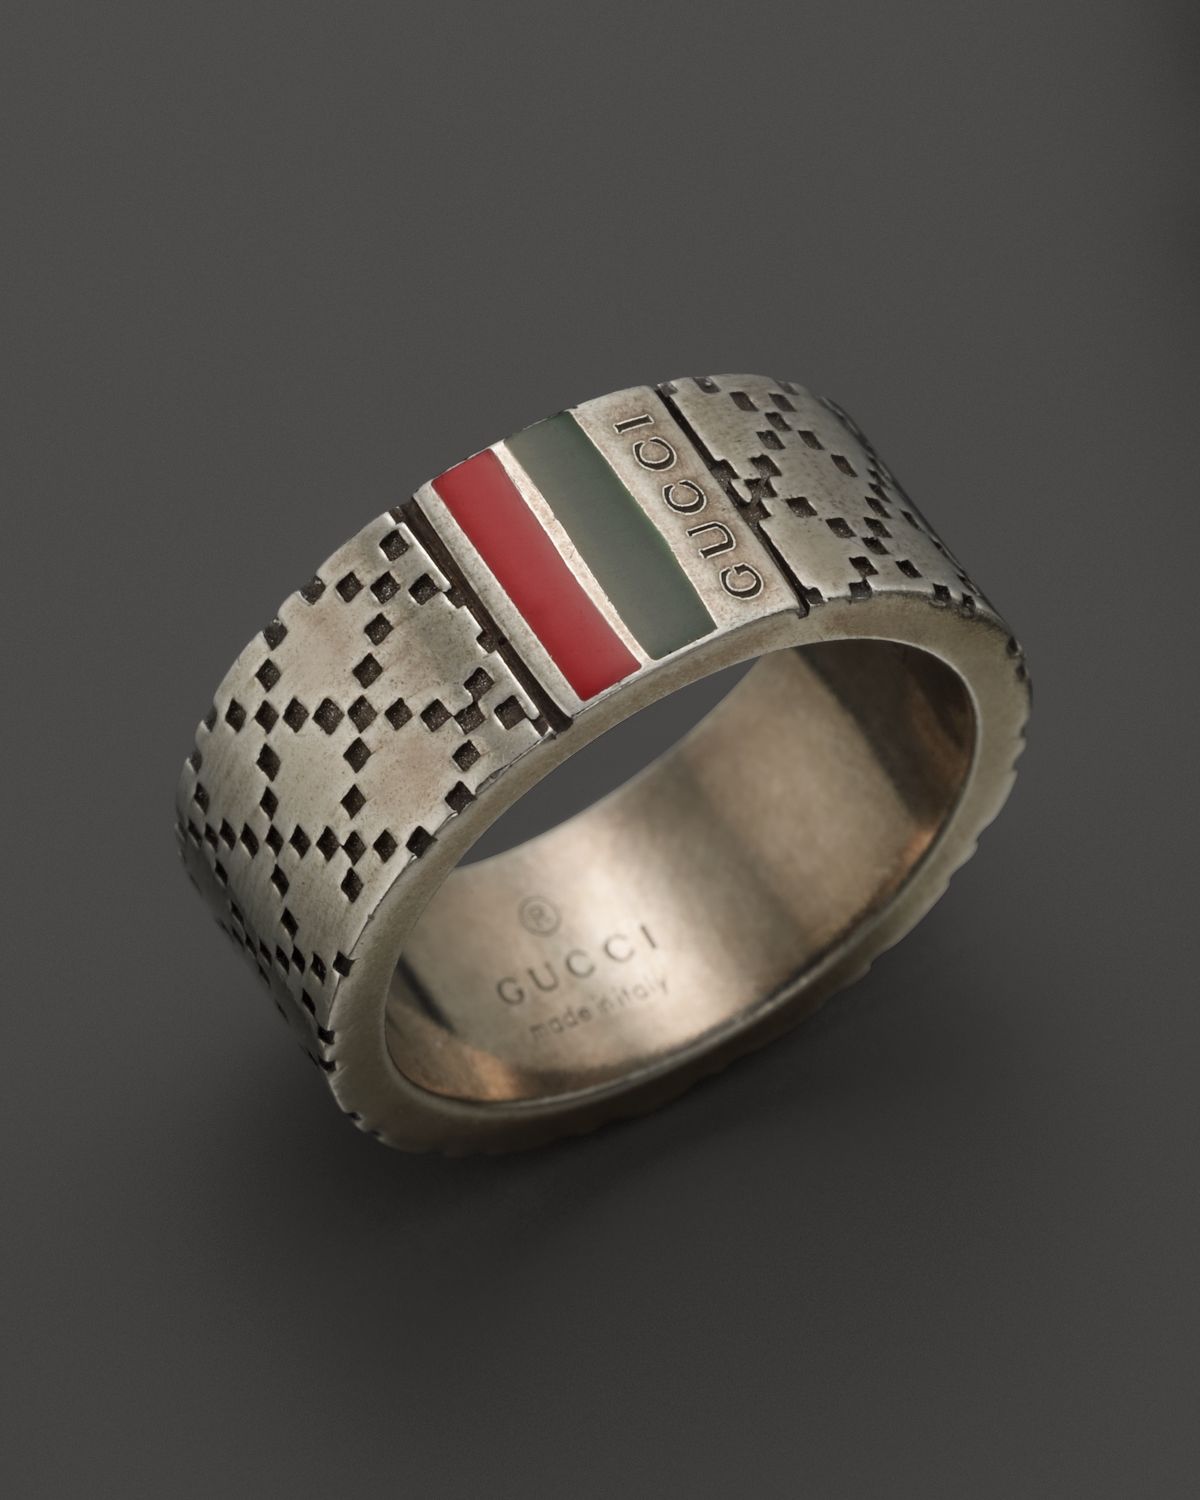 Gucci Aged Sterling Silver and Enamel Diamantissima Motif 8mm Ring in